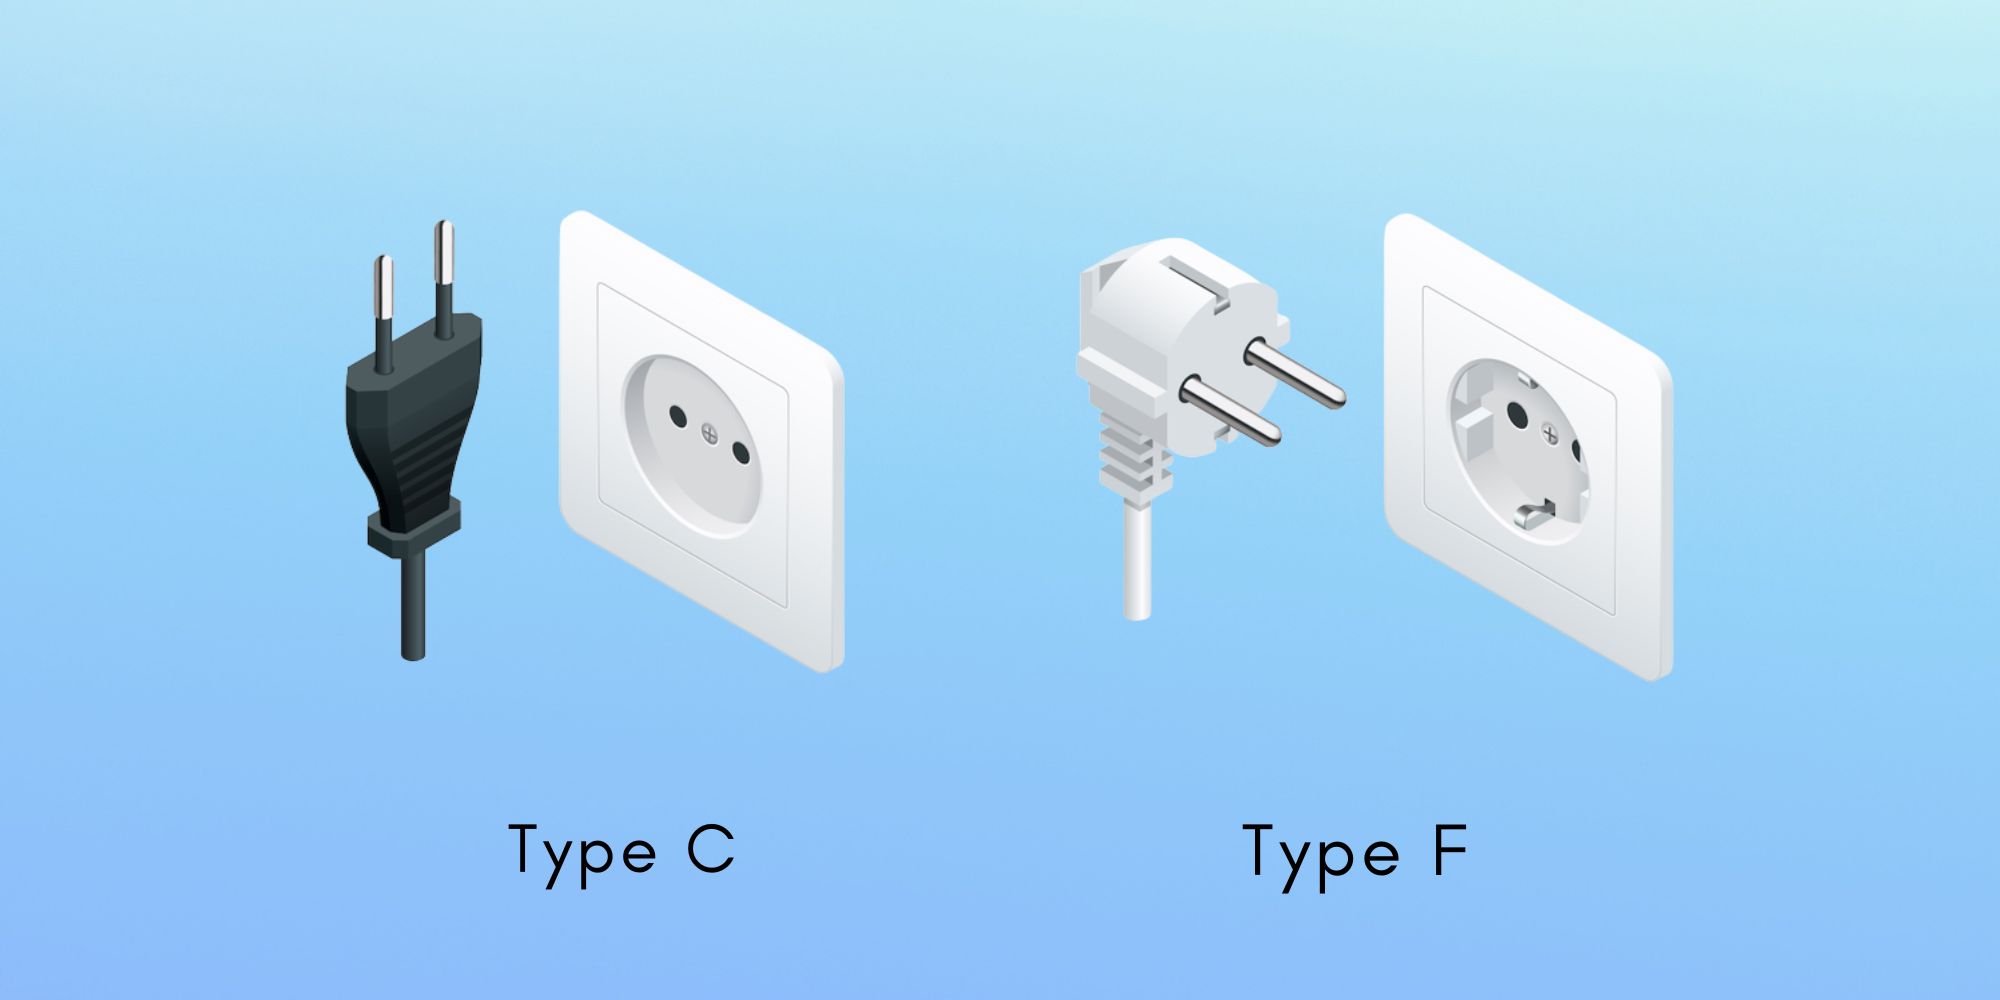 Slovenia Power Plugs and Sockets: Type C and Type F
